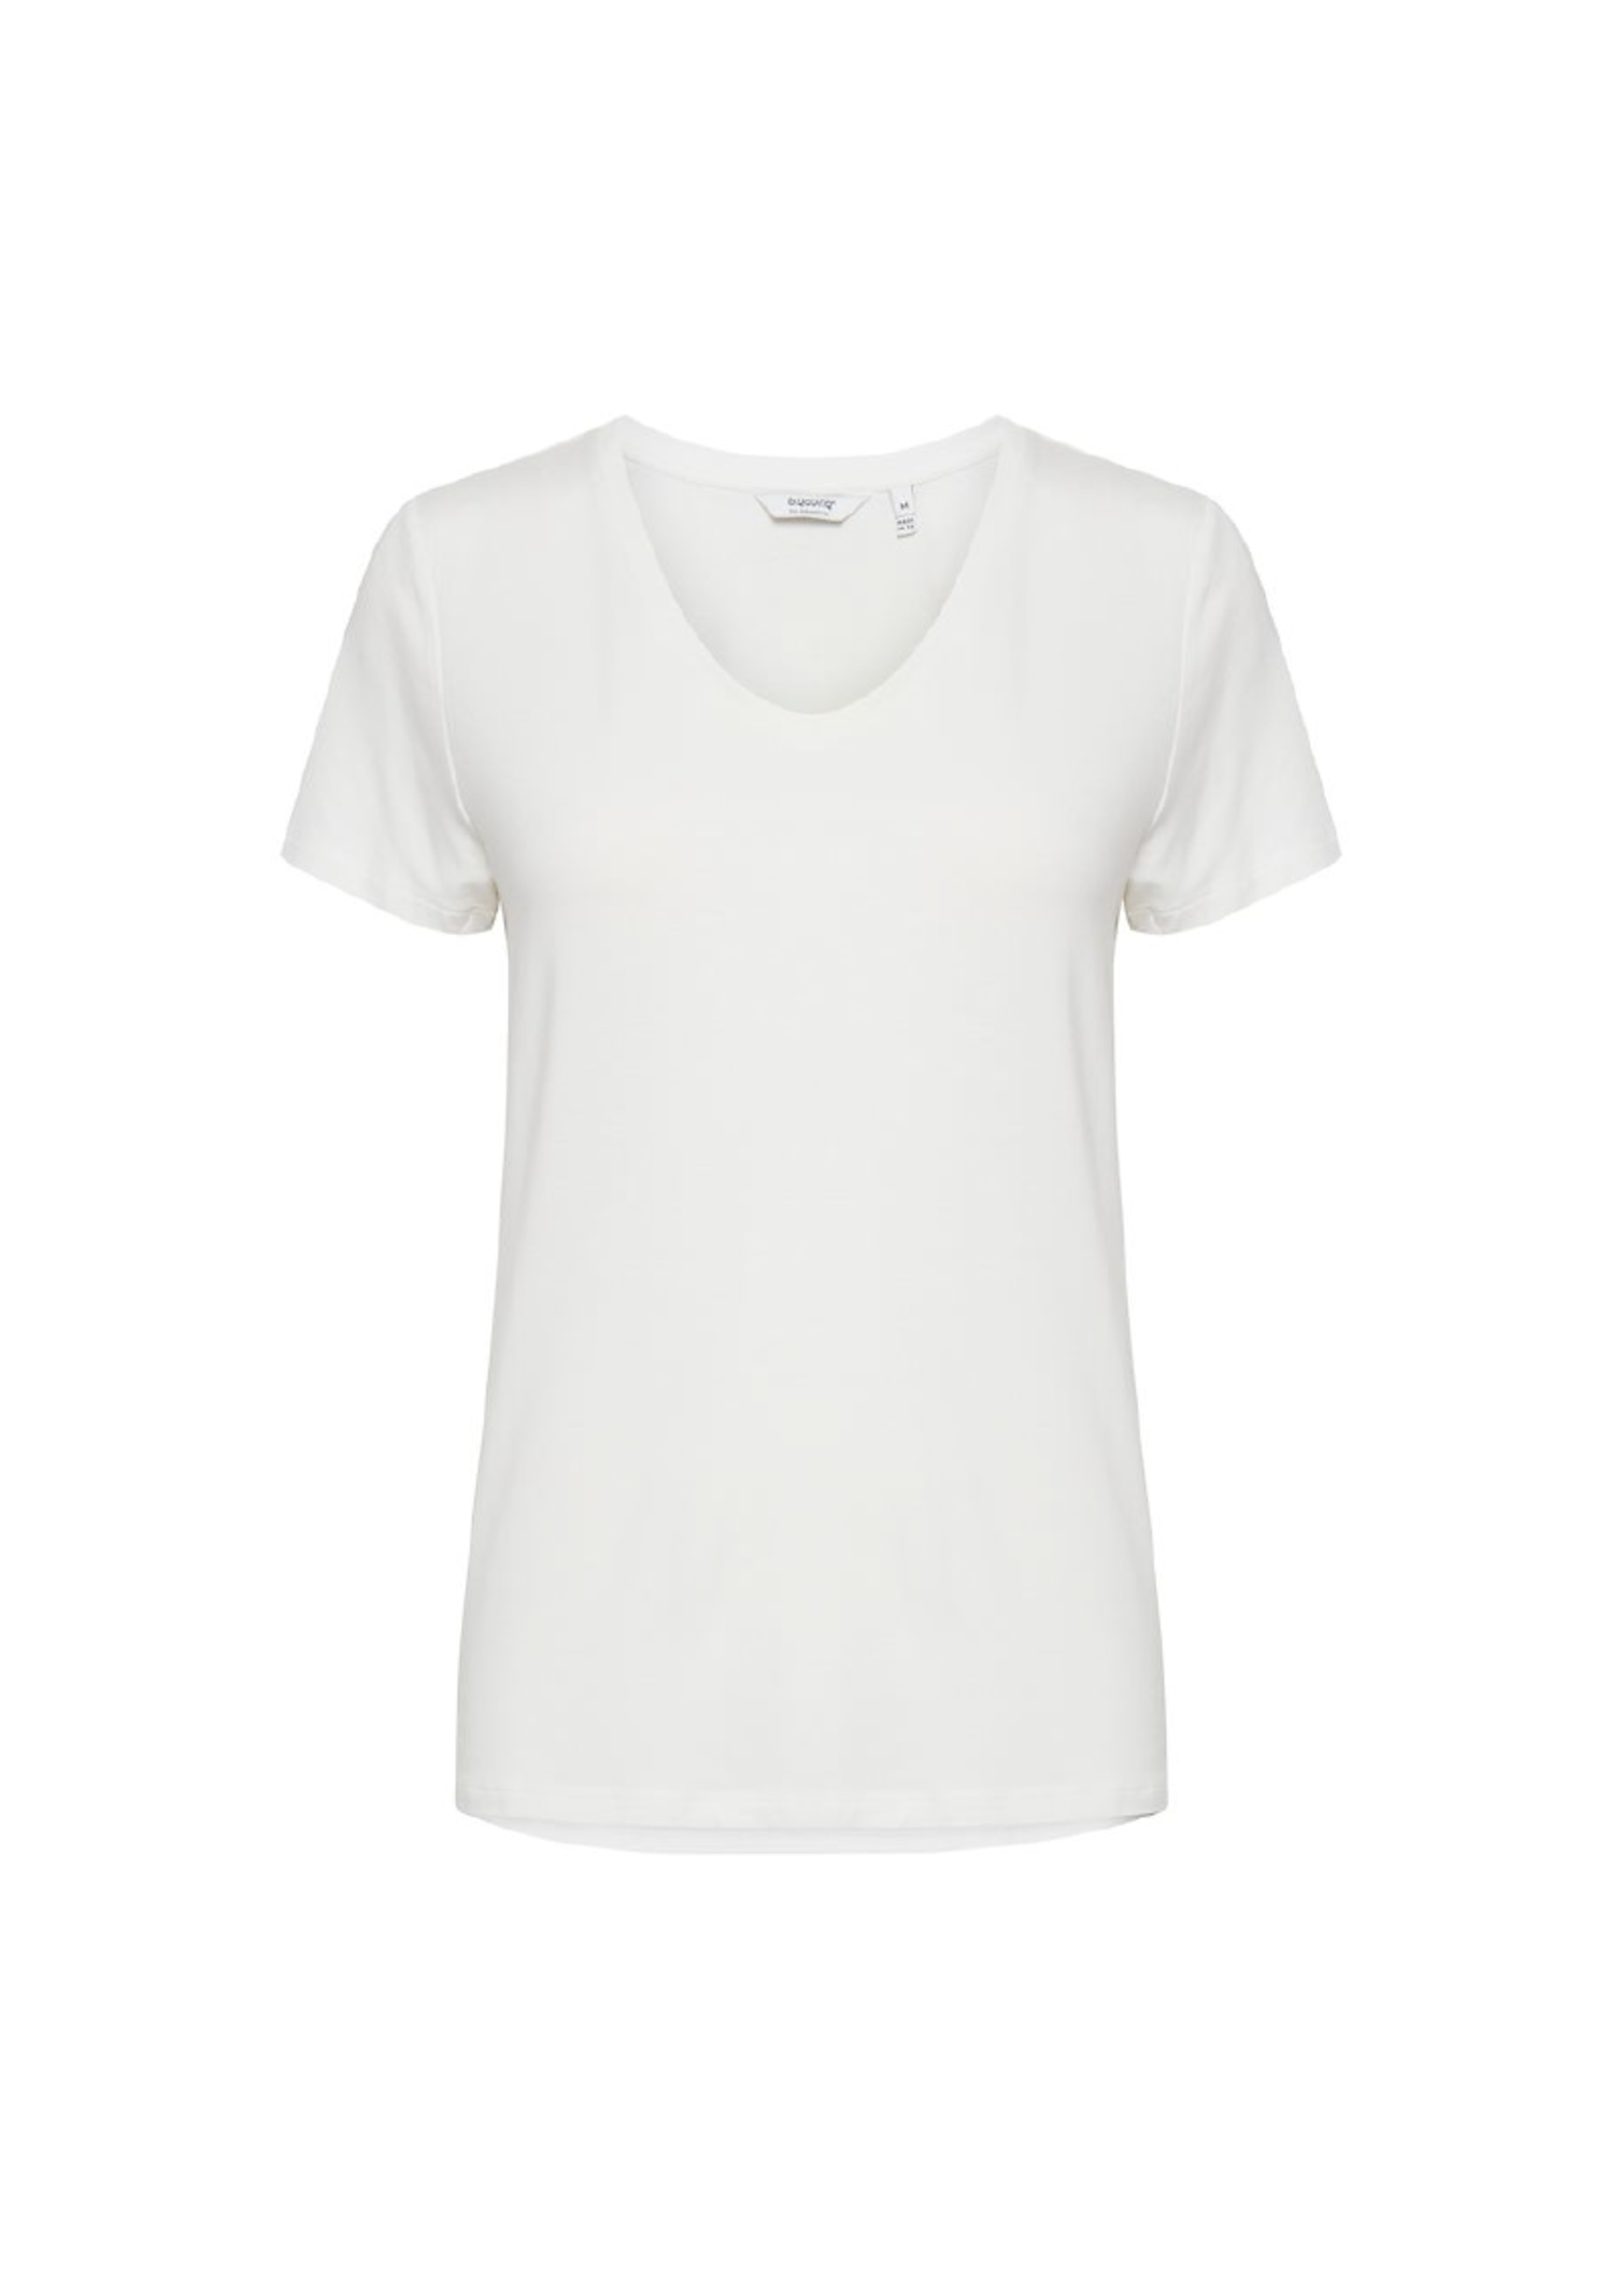 B. Young Lyocell Super Soft Tee